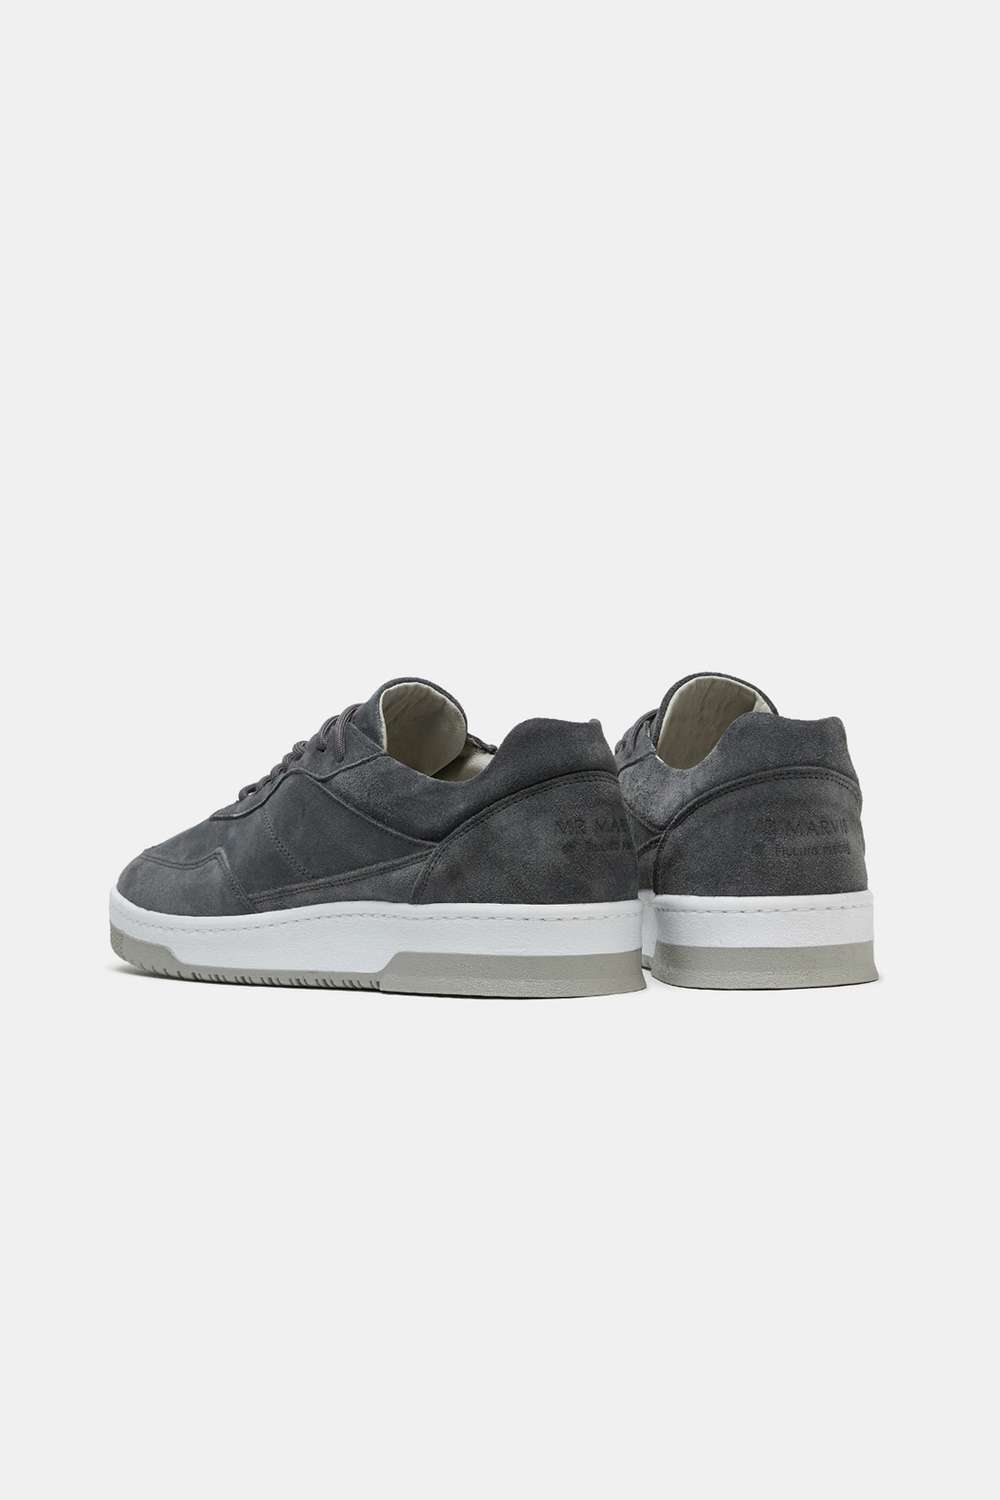 Storms * The Suede Sneakers